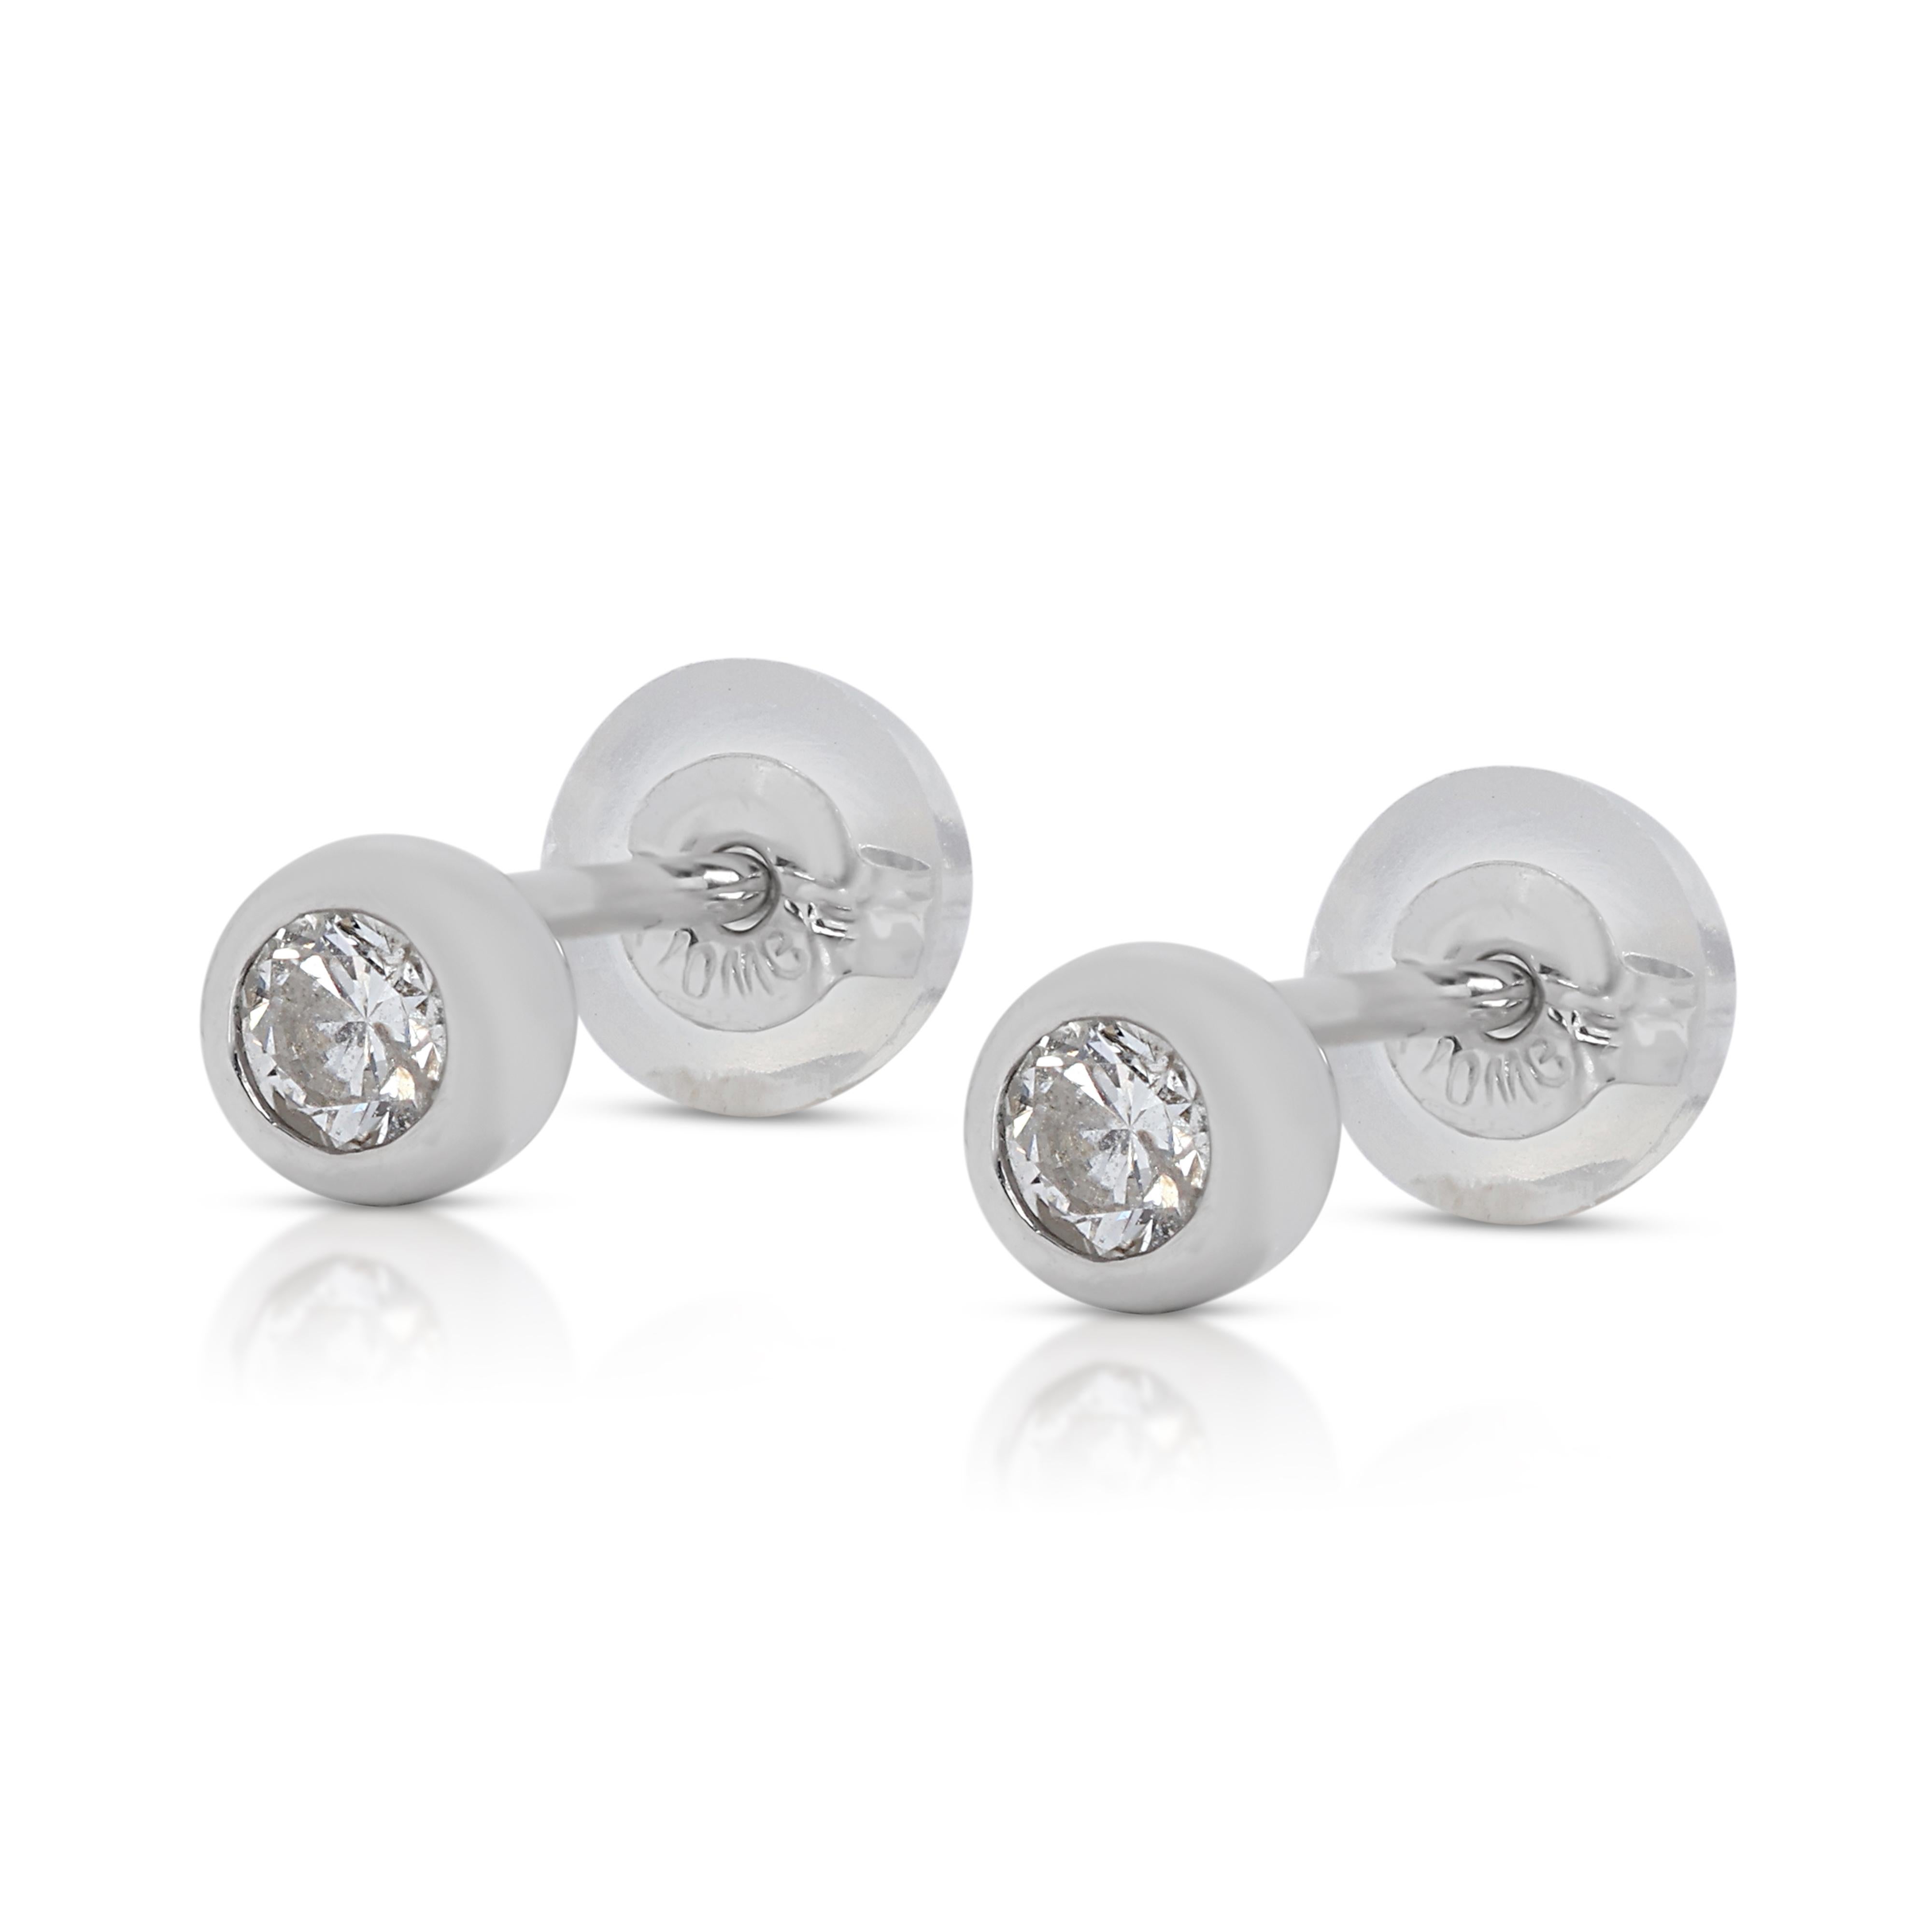 Exquisite 0.14ct Diamond Stud Earrings in 10K White Gold In Excellent Condition For Sale In רמת גן, IL